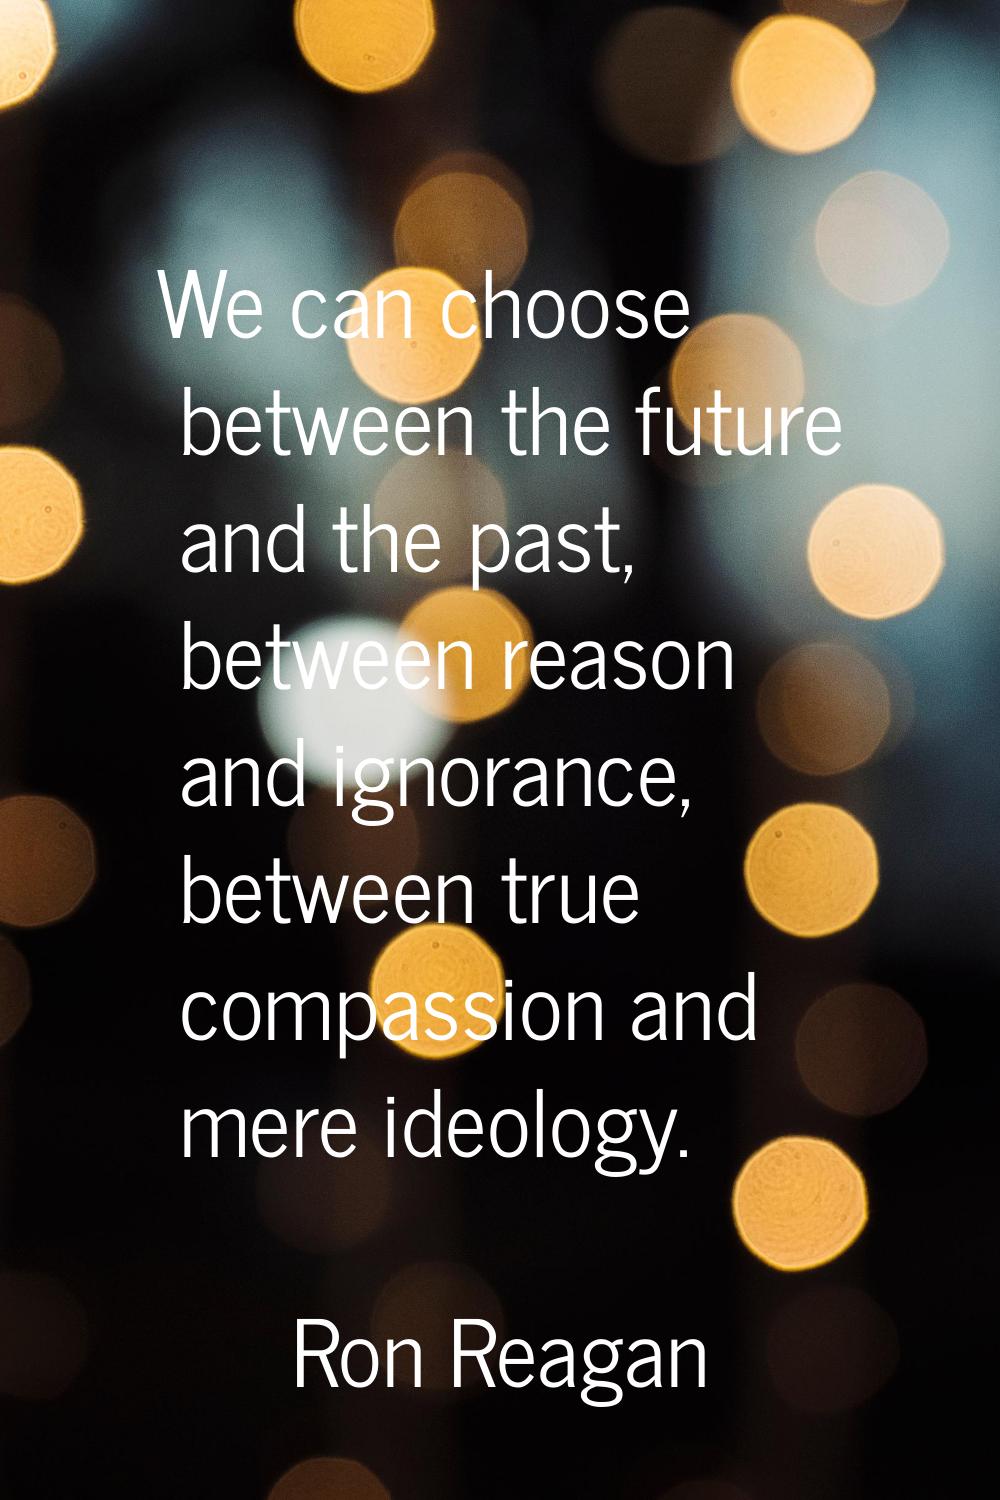 We can choose between the future and the past, between reason and ignorance, between true compassio